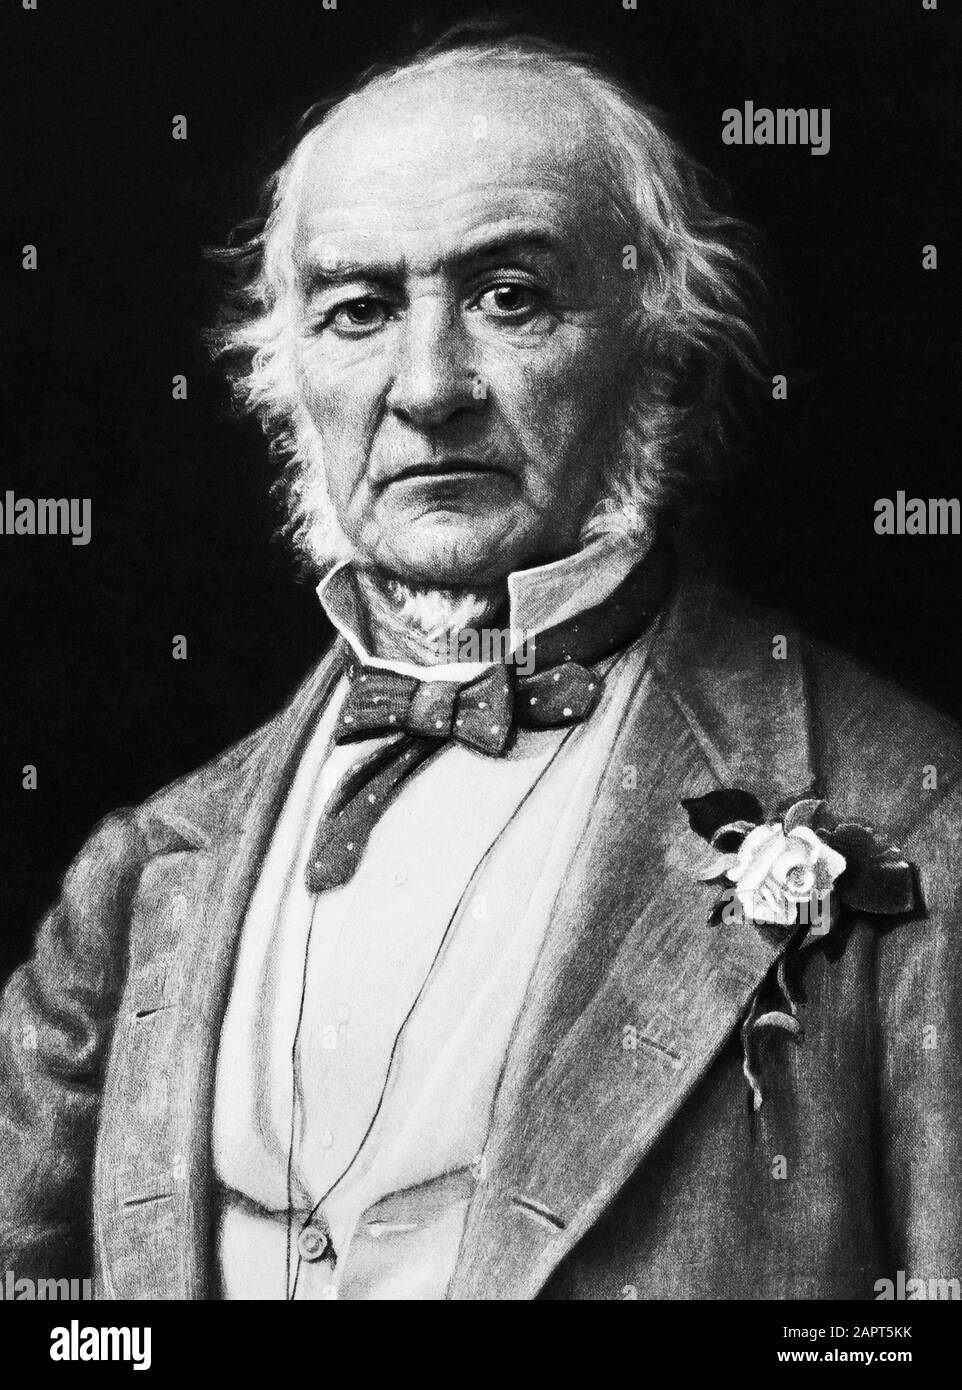 Vintage portrait of William Ewart Gladstone (1809 – 1898) – the British Liberal politician who served as Prime Minister of the United Kingdom on four occasions between 1868 and 1894. Detail from a photogravure print circa 1892 by Henry Graves & Co / photographer Franz Hanfstaengl / artist John Colin Forbes. Stock Photo